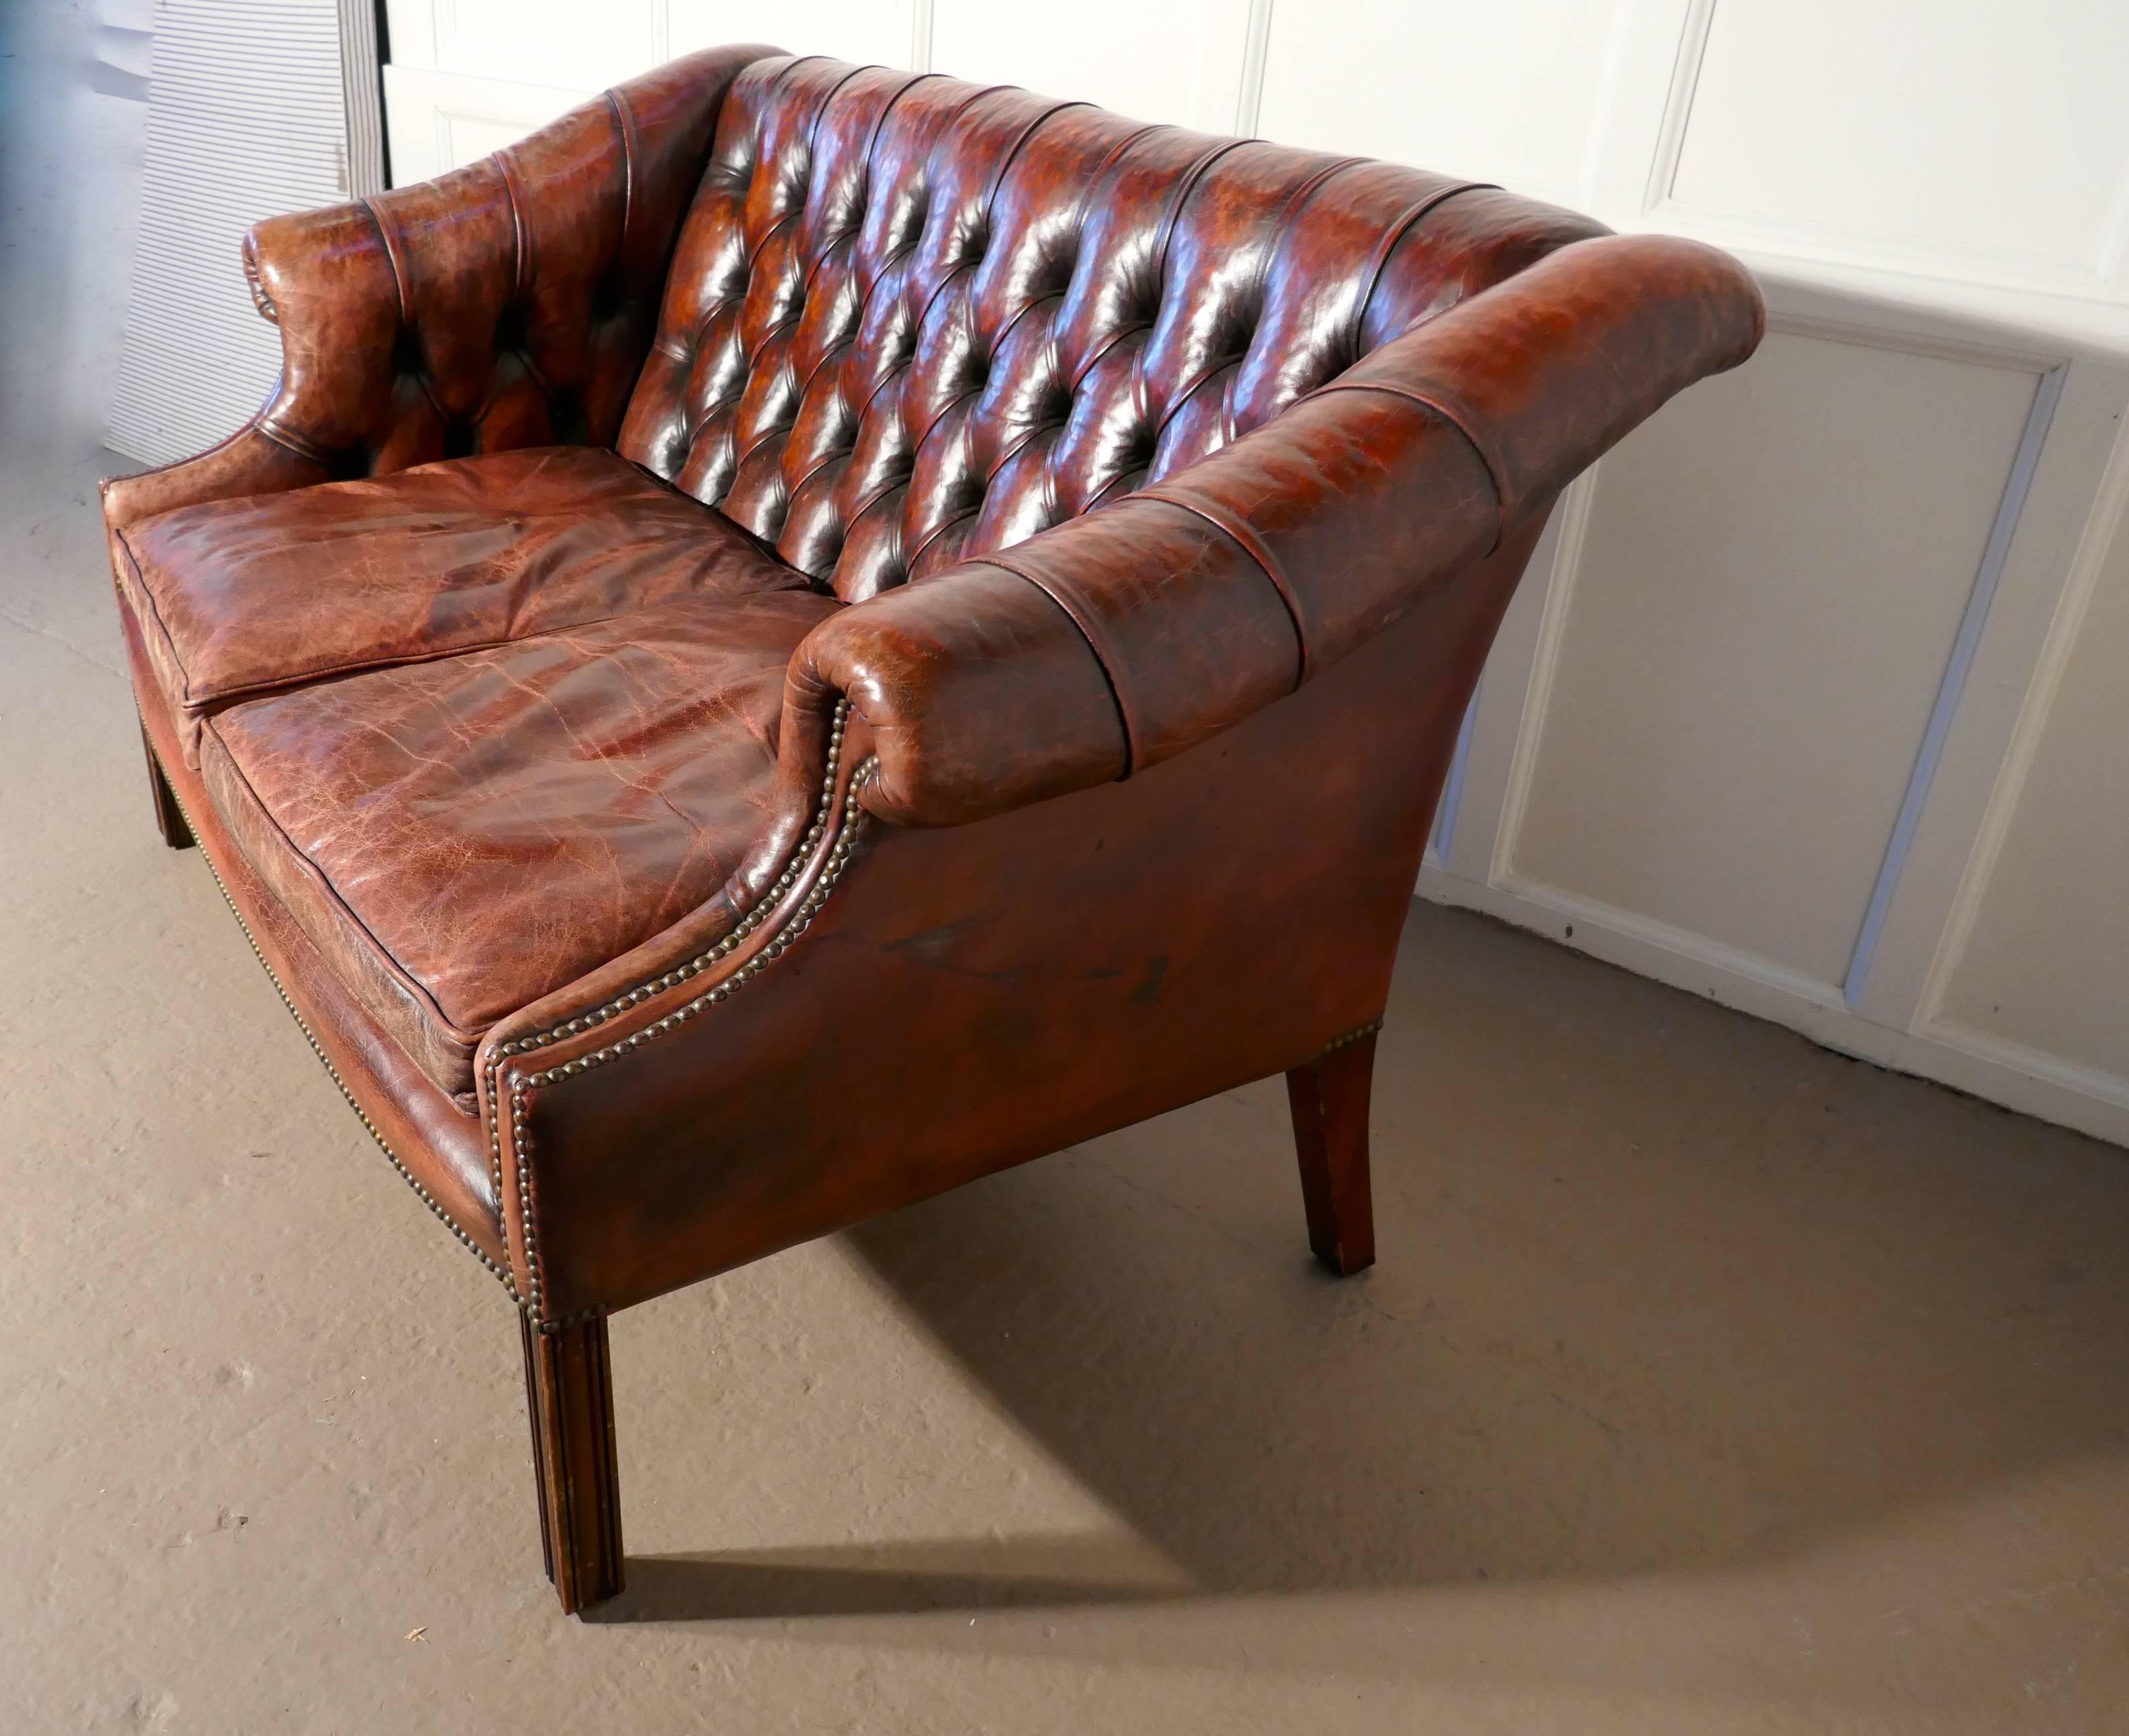 Edwardian leather two-seat library Chesterfield settee

This settee is the ultimate in vintage Country House Chic, it has a delightful neat shape, and the leather upholstery is original with the great character and softness that can only be